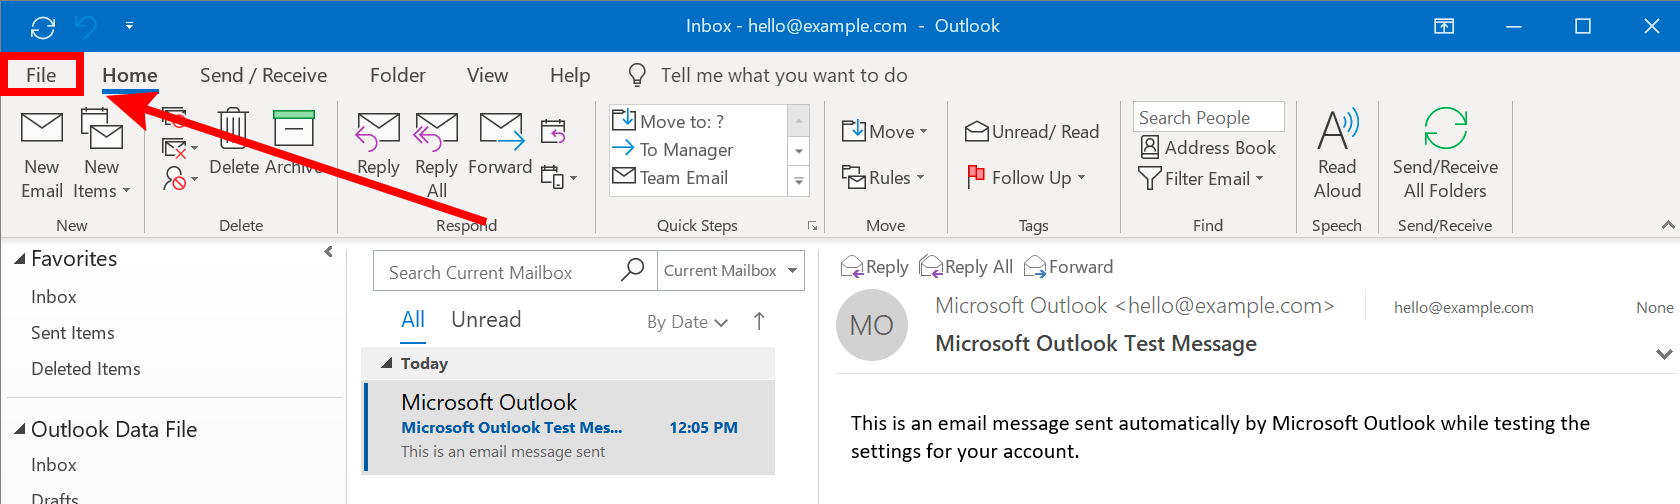 File Menu in Outlook 365, 2019 and 2016